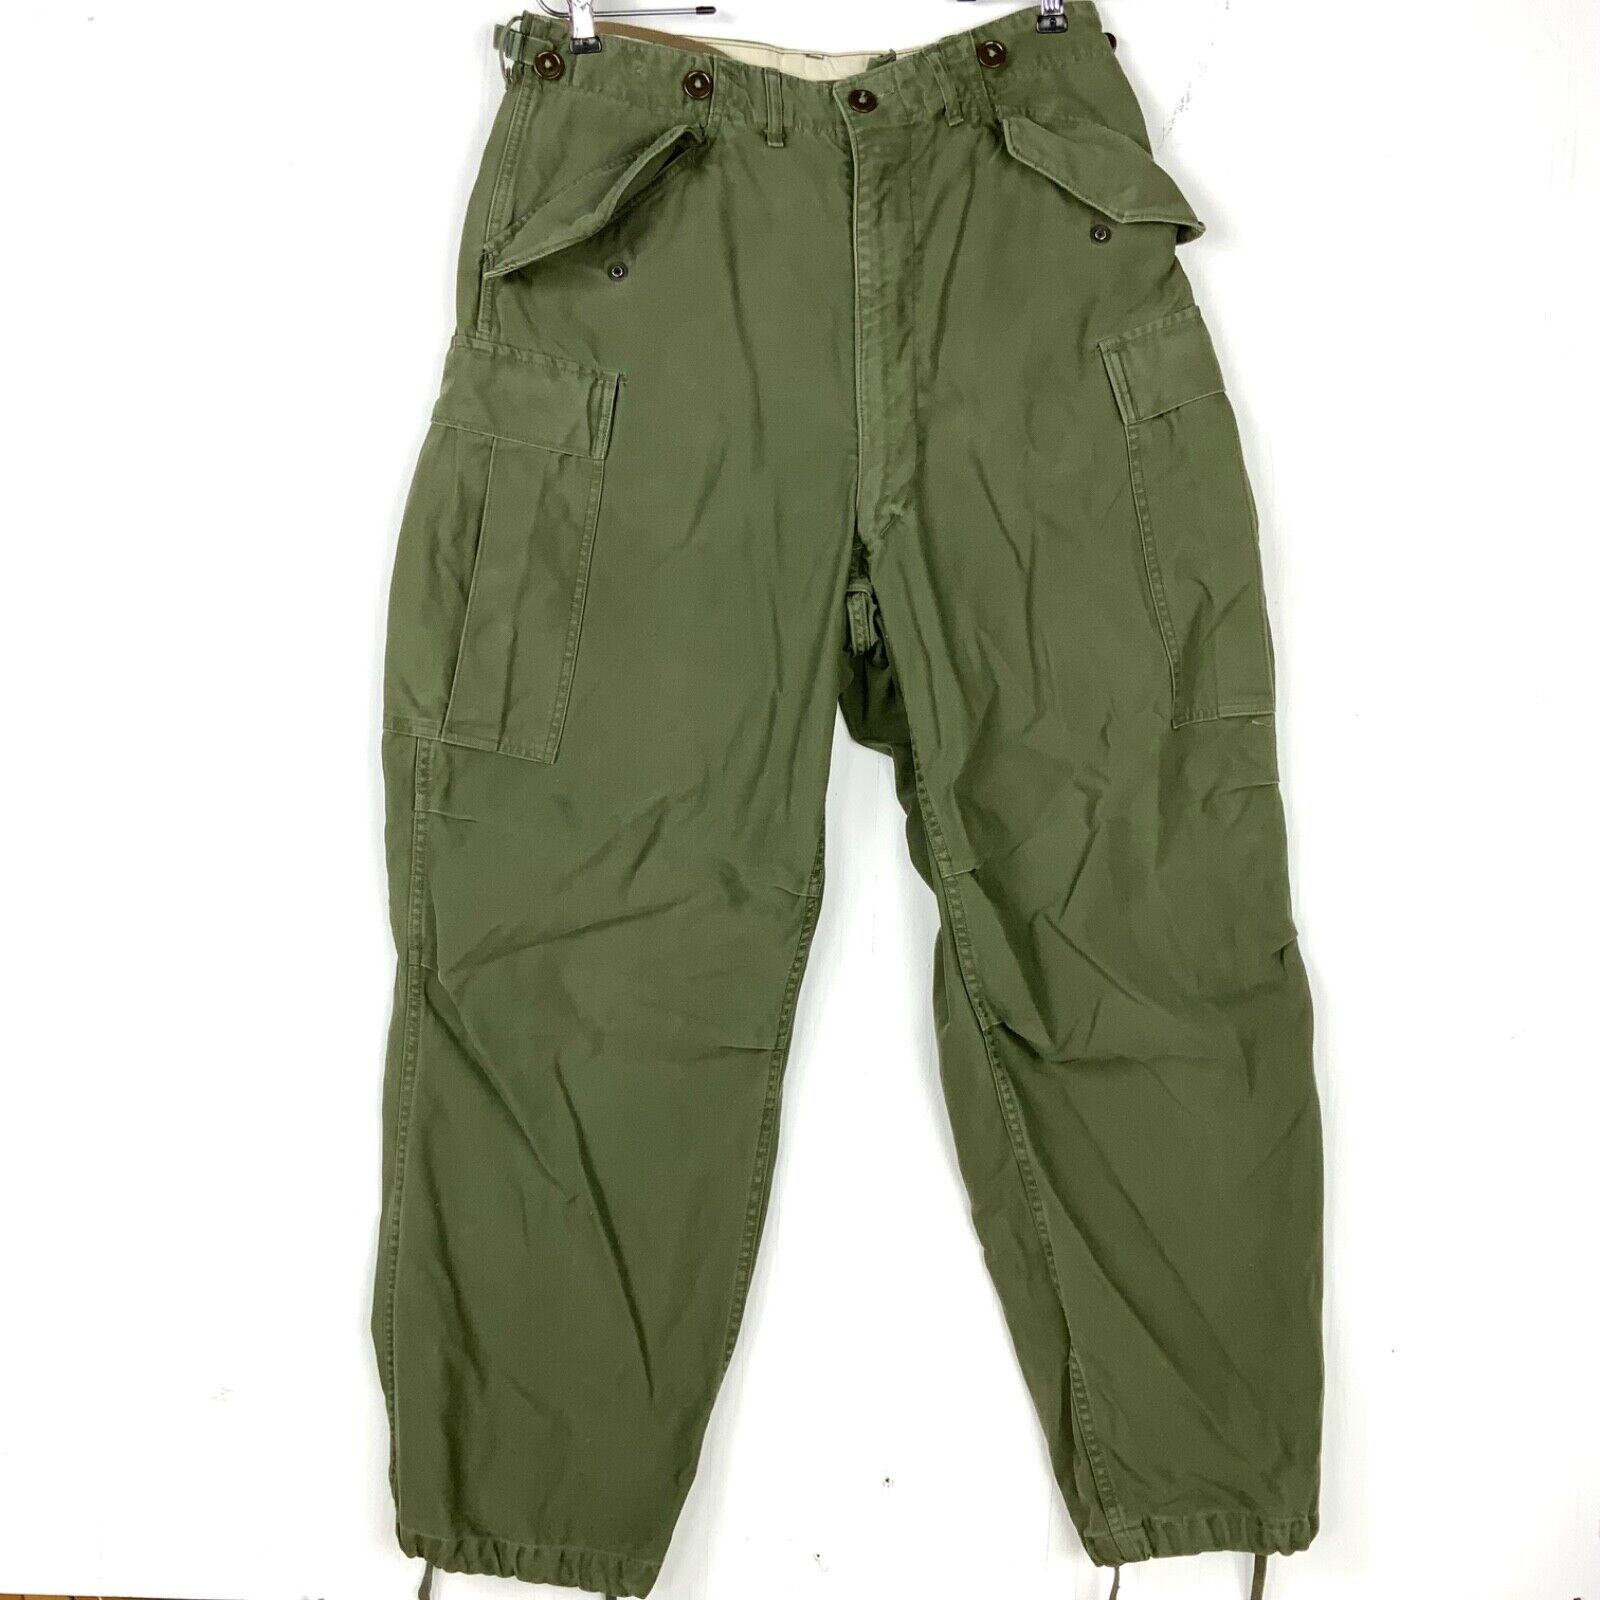 Vintage Us Military M-1951 Cargo Trousers Size 32 x 29 Green